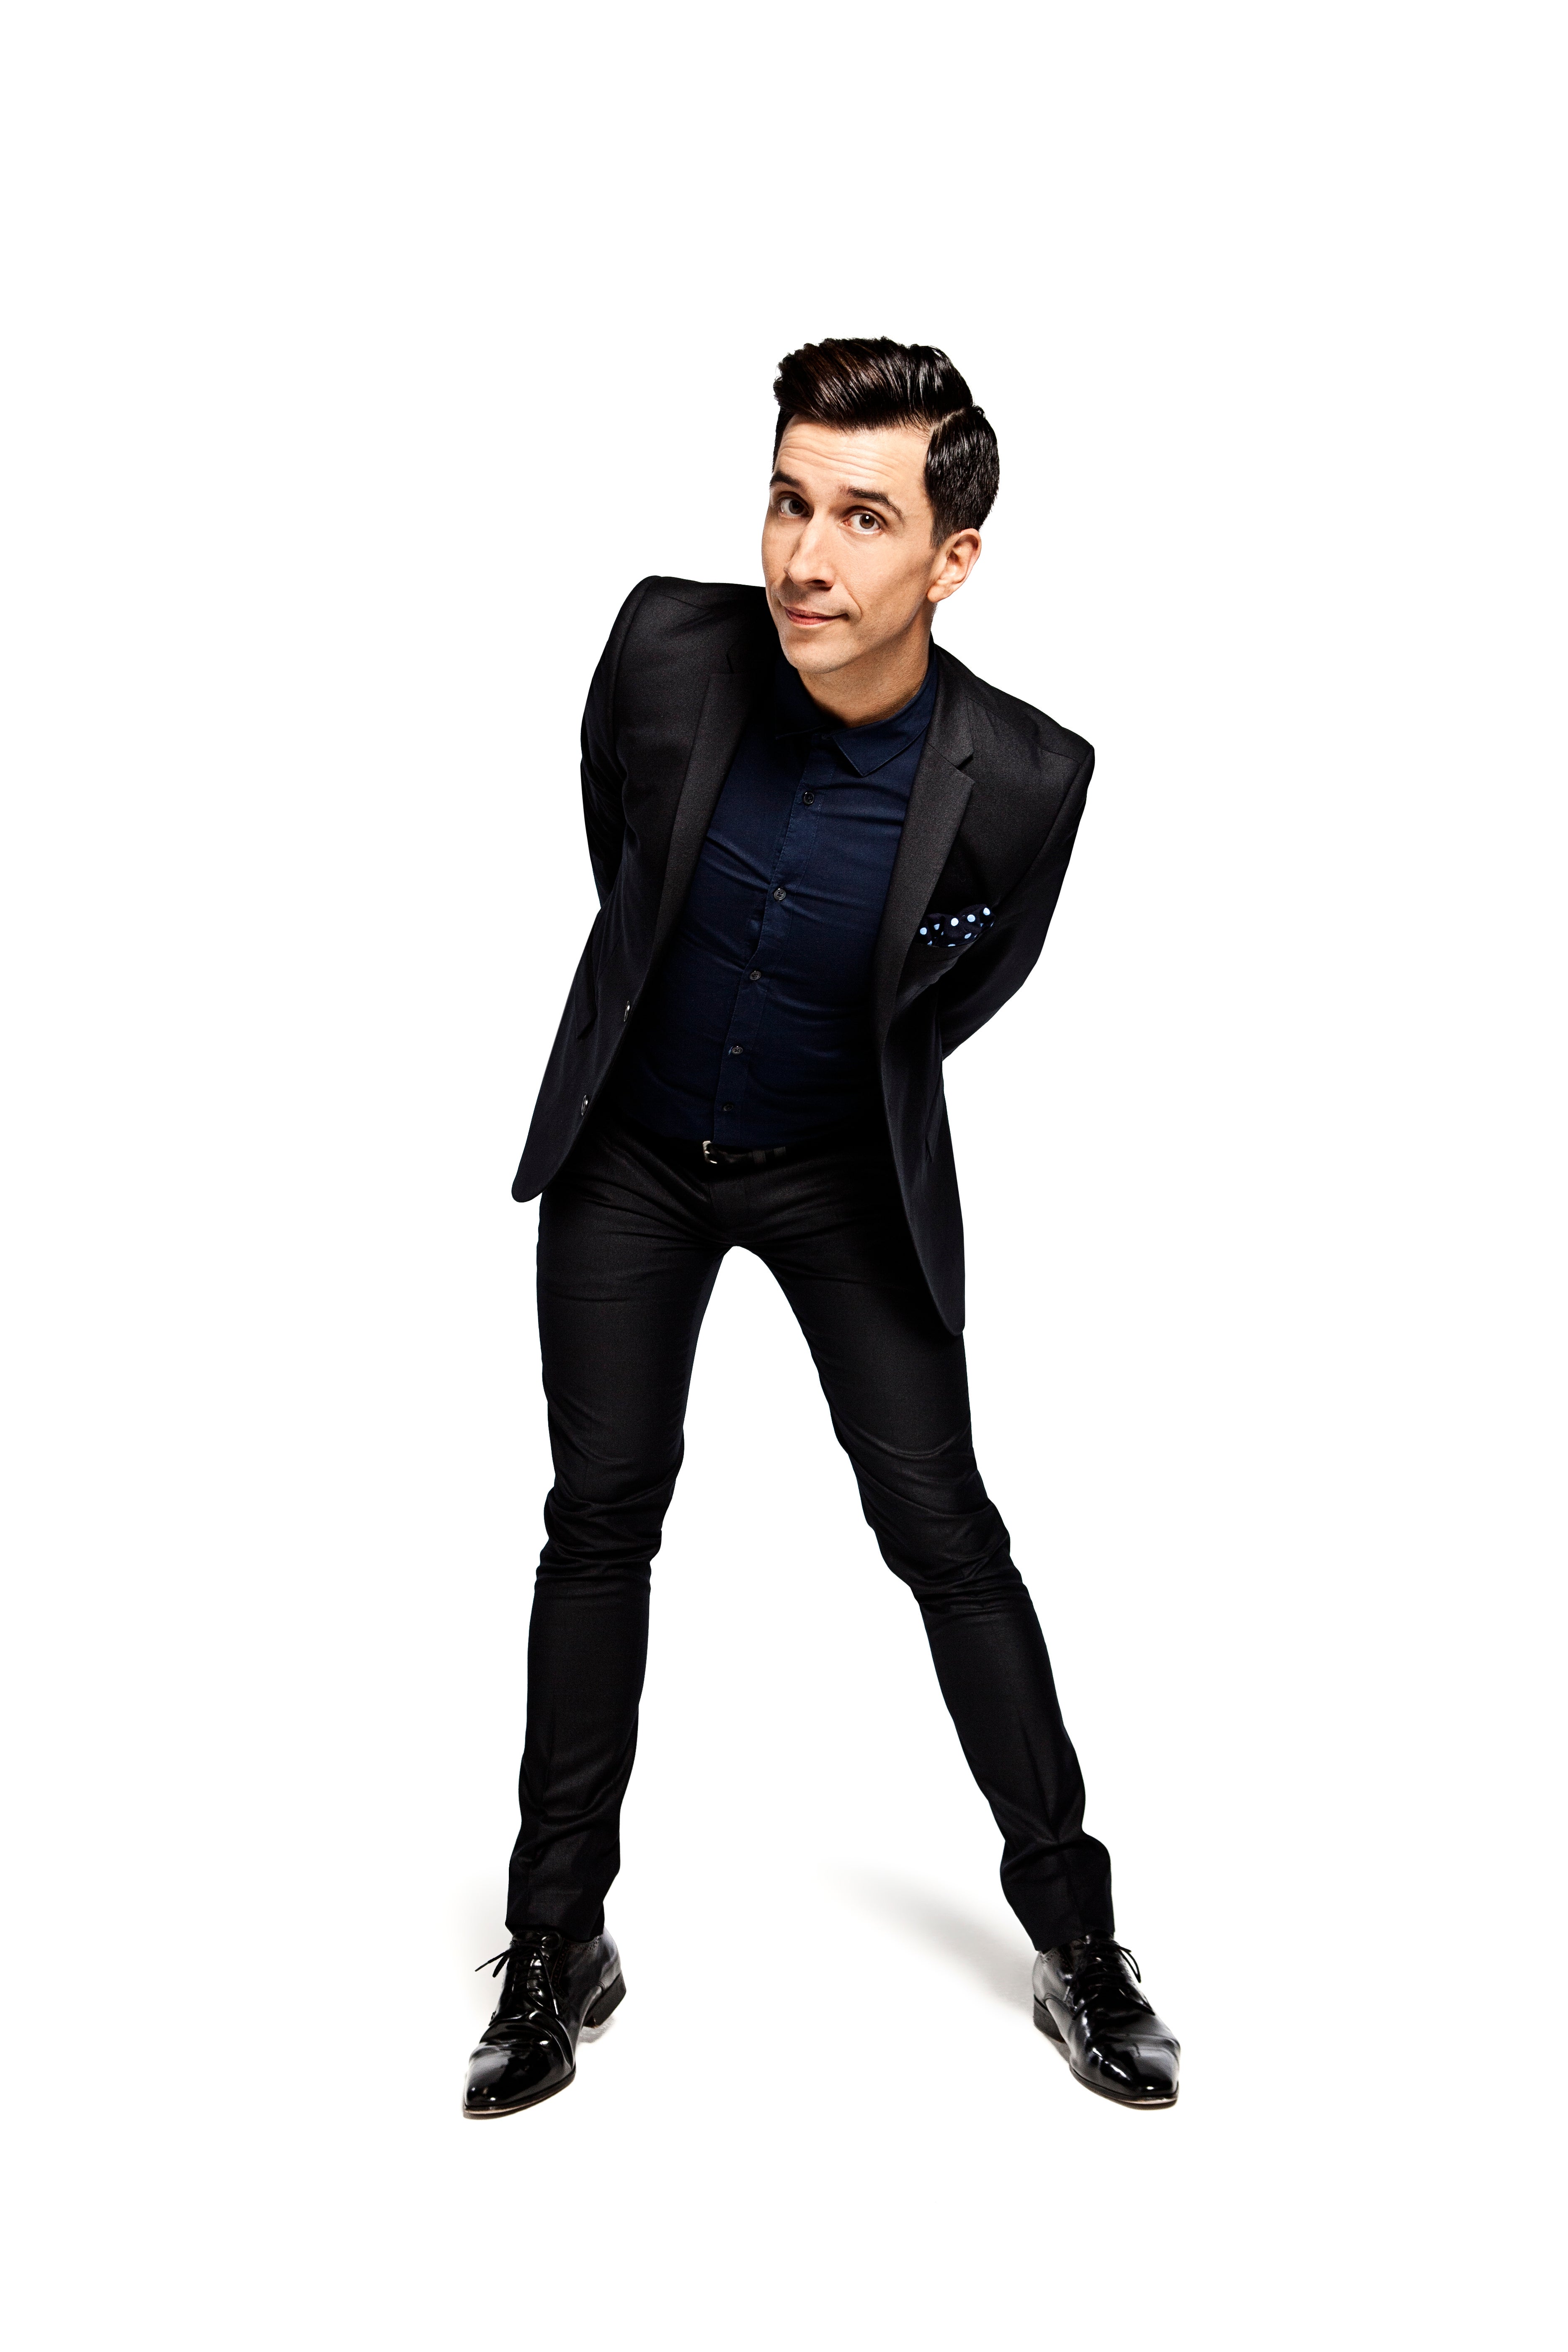 Russell Kane: Hyperactive presale passcode for advance tickets in Newcastle Upon Tyne